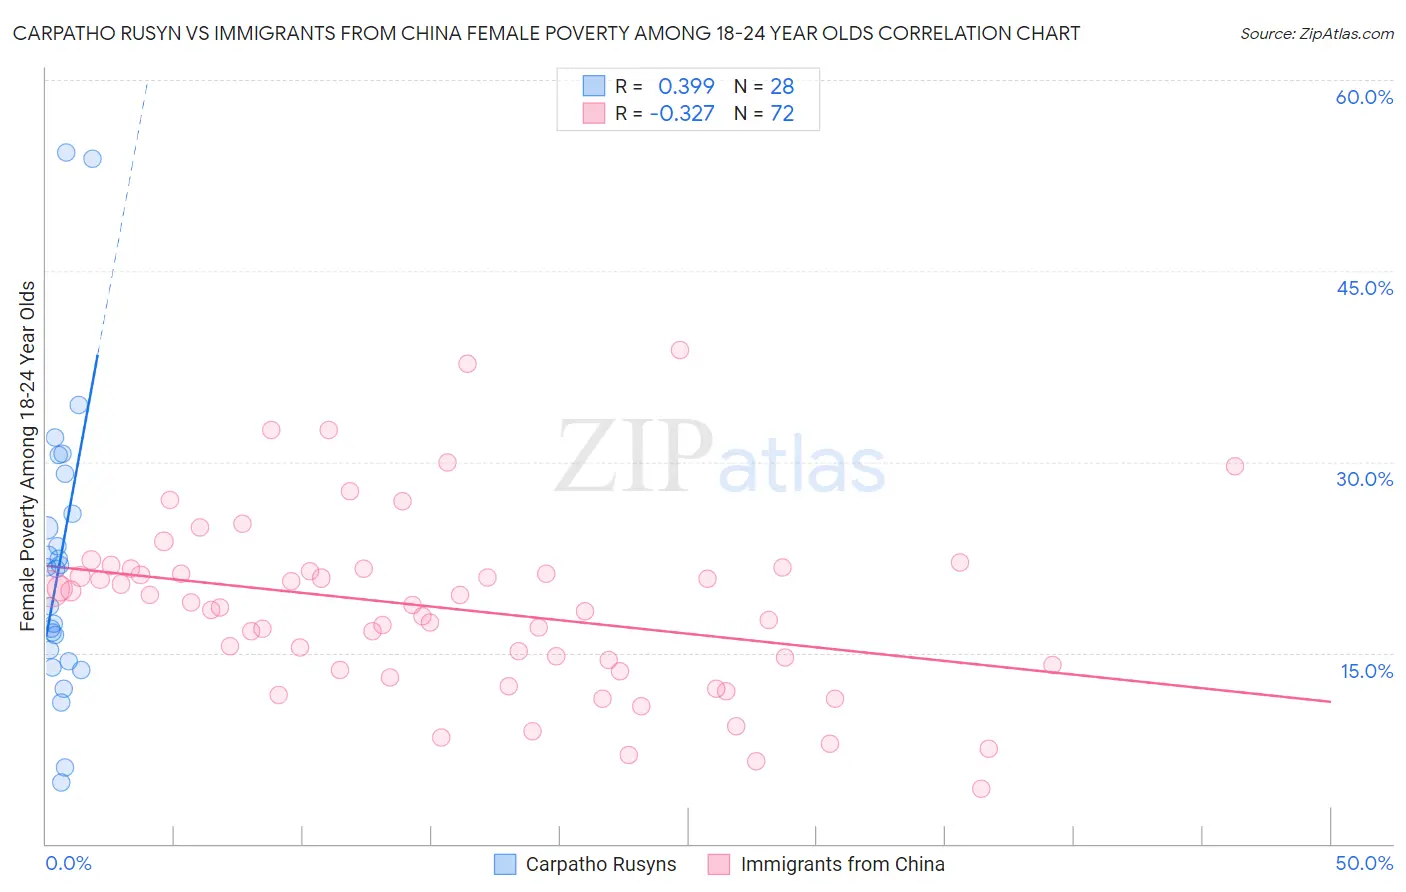 Carpatho Rusyn vs Immigrants from China Female Poverty Among 18-24 Year Olds